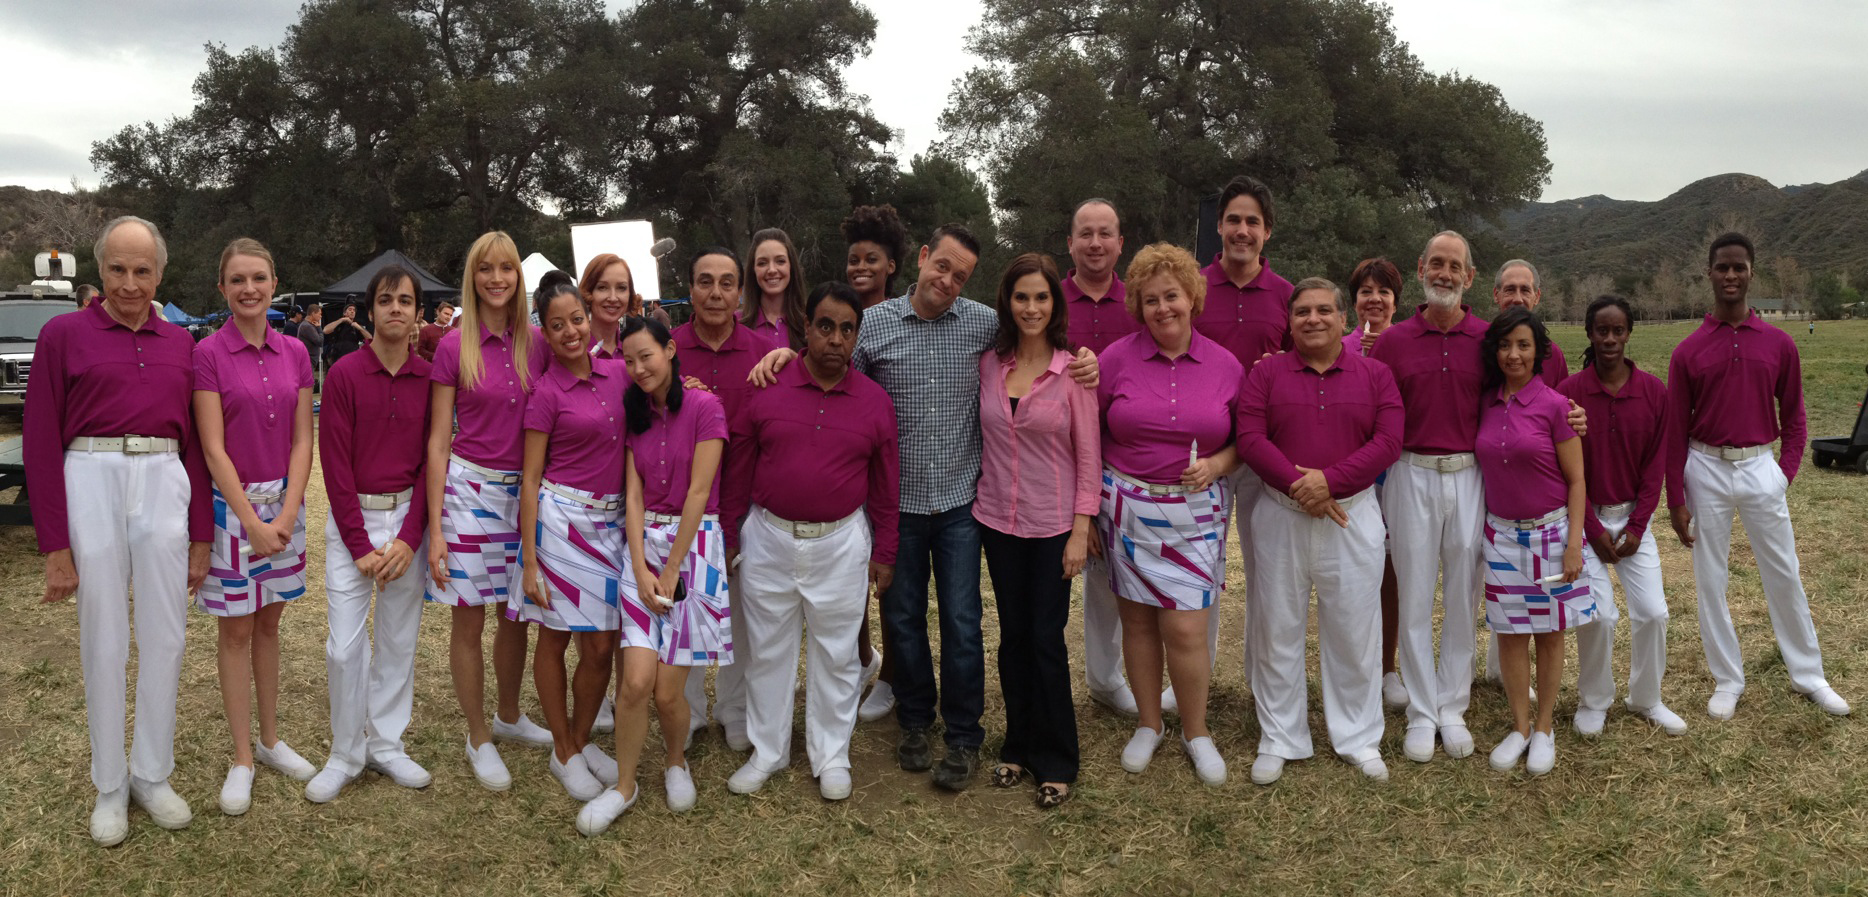 Tracy Weisert in ABC's THE NEIGHBORS Alien group shot with Jami Gertz & Lenny Venito and fellow Alien friends 2013